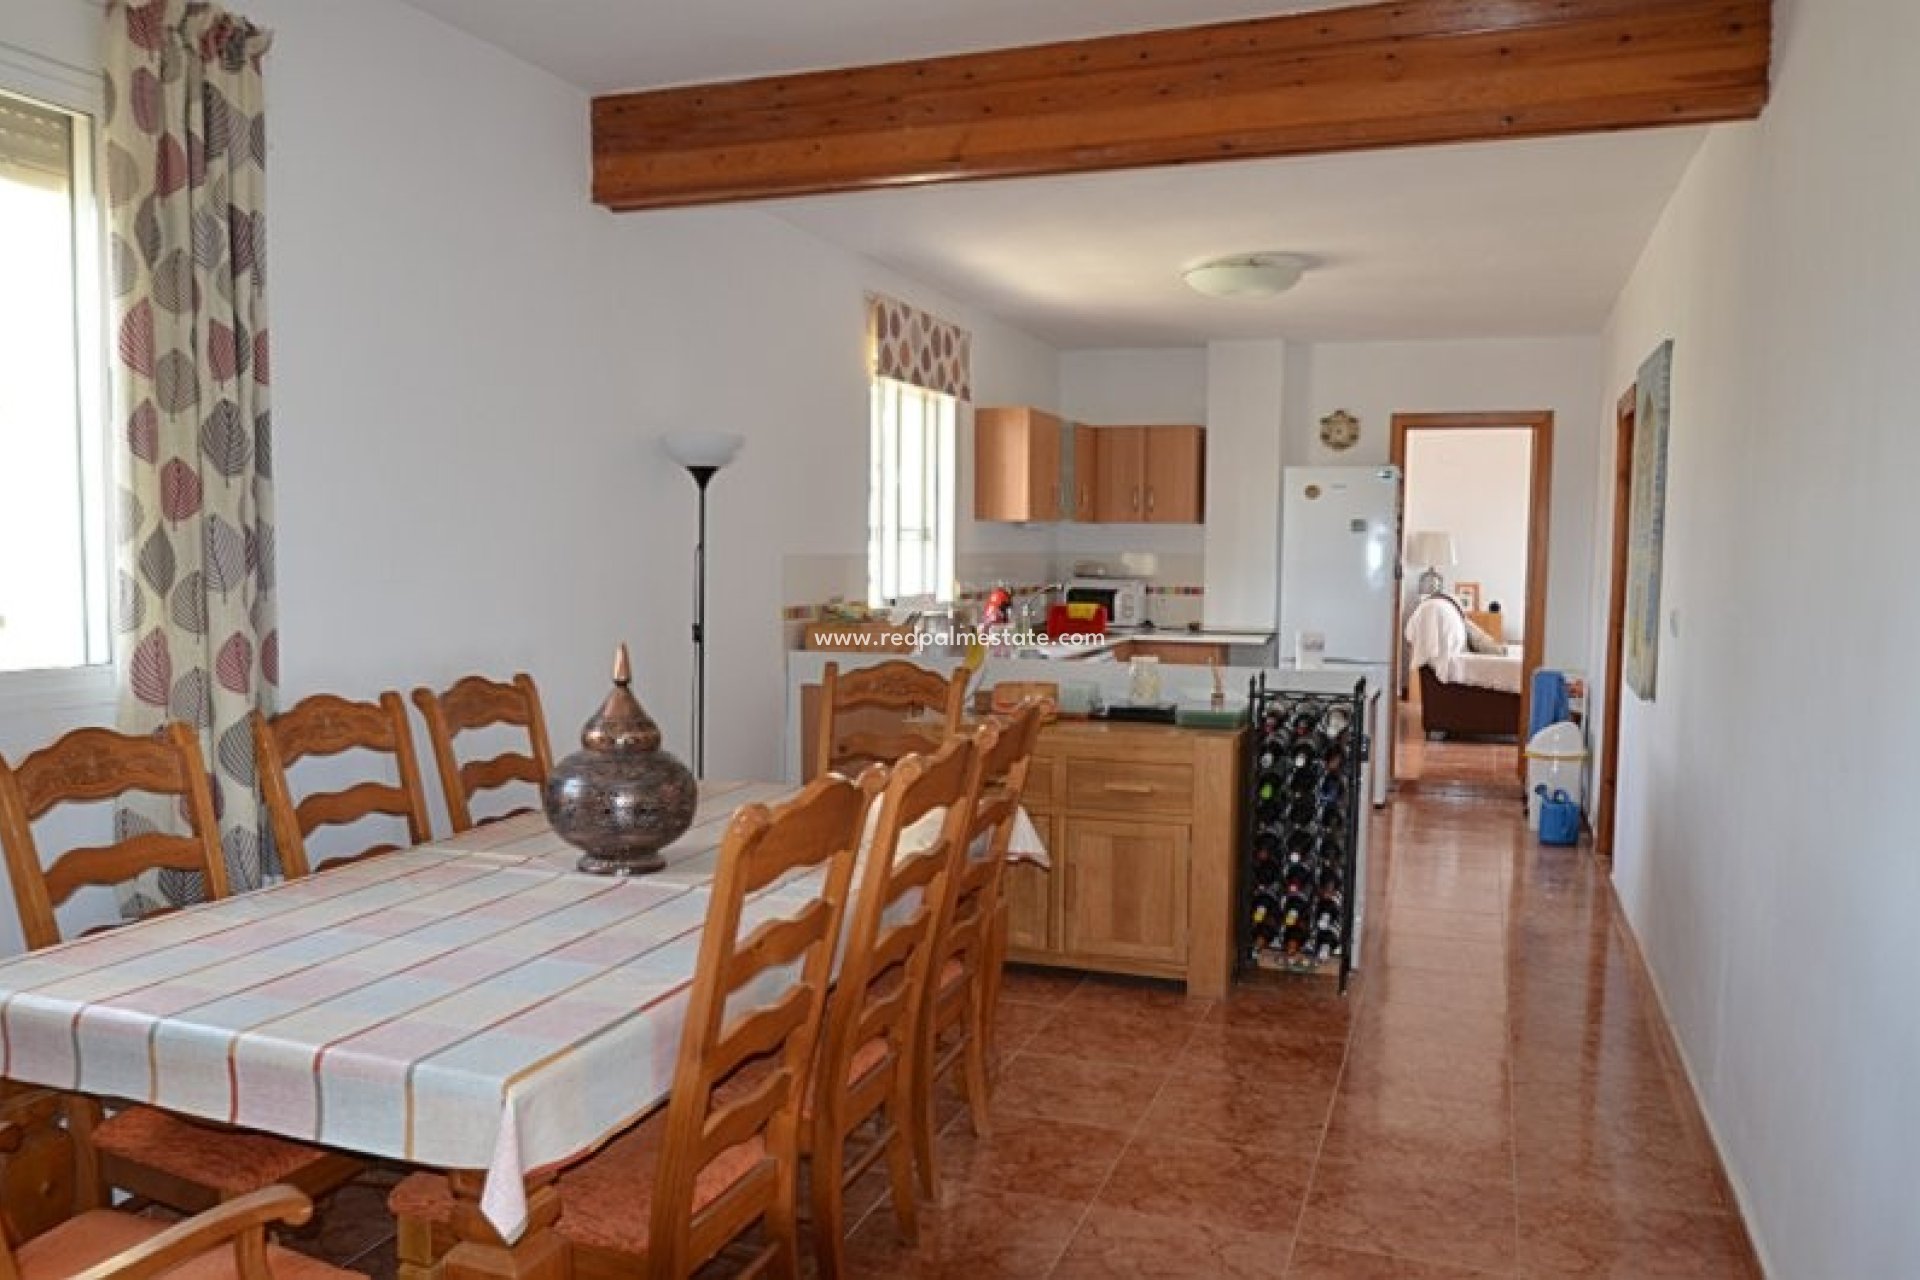 Resale - Country House -
Calasparra